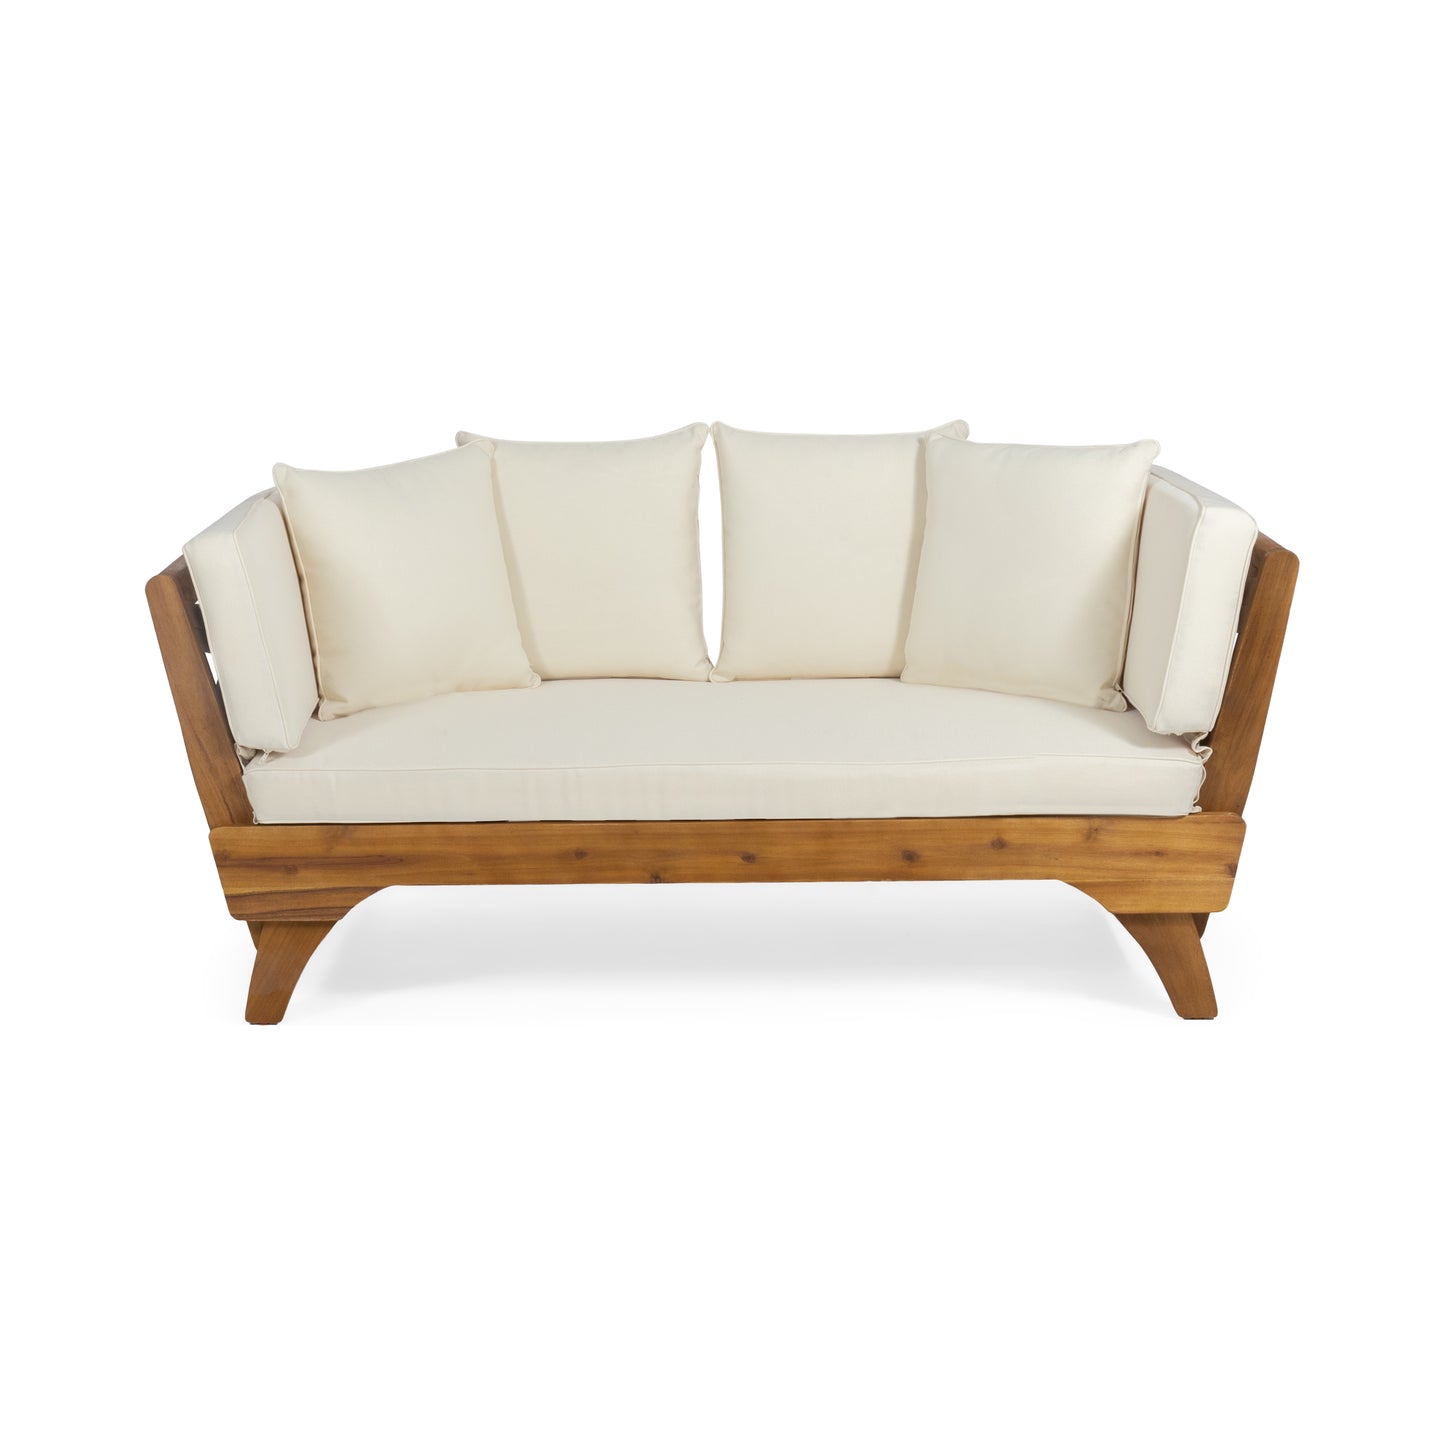 Oceanna Outdoor Acacia Wood and Rope Expandable Daybed with Cushions